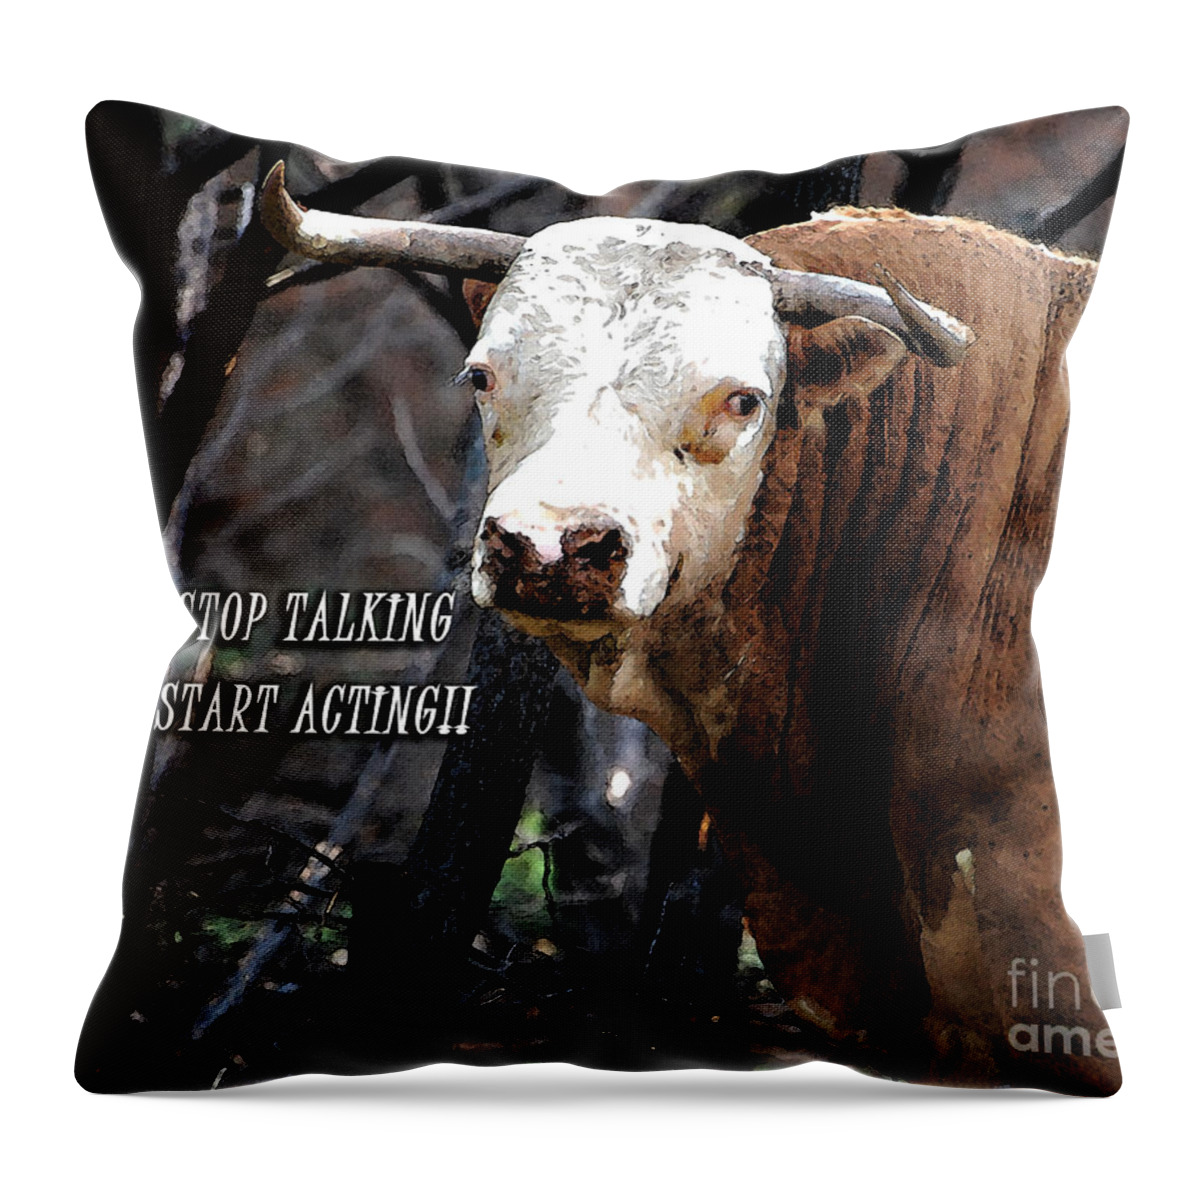 Boy Throw Pillow featuring the photograph Stop Talking by Linda Cox